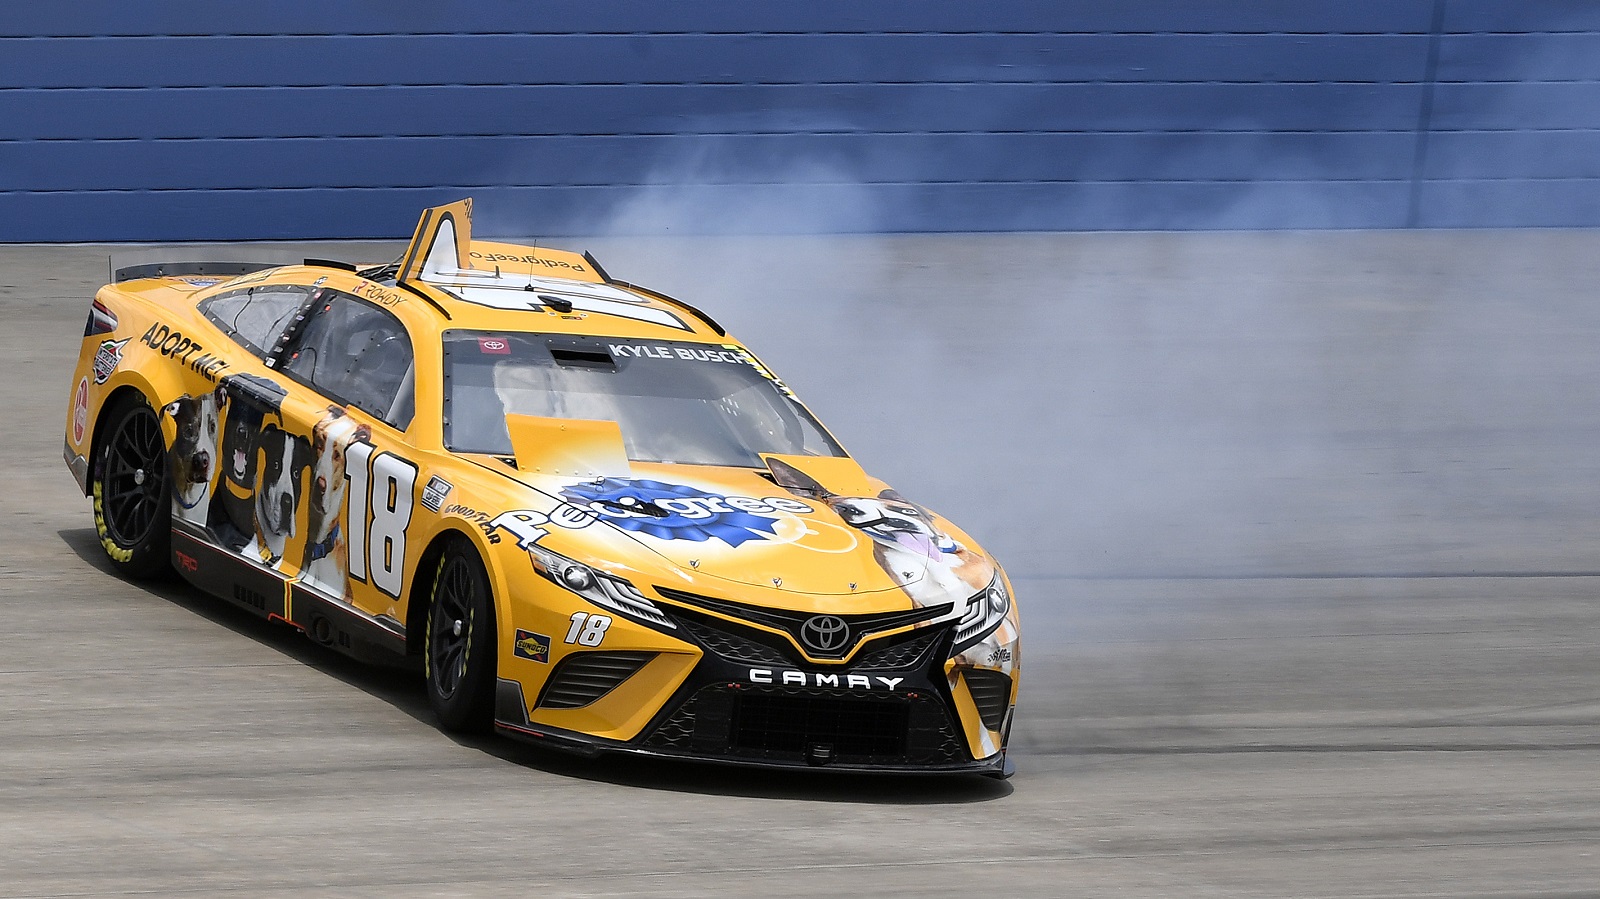 Kyle Busch, driver of the No. 18 Toyota, spins during qualifying for the NASCAR Cup Series Ally 400 at Nashville Superspeedway on June 25, 2022.